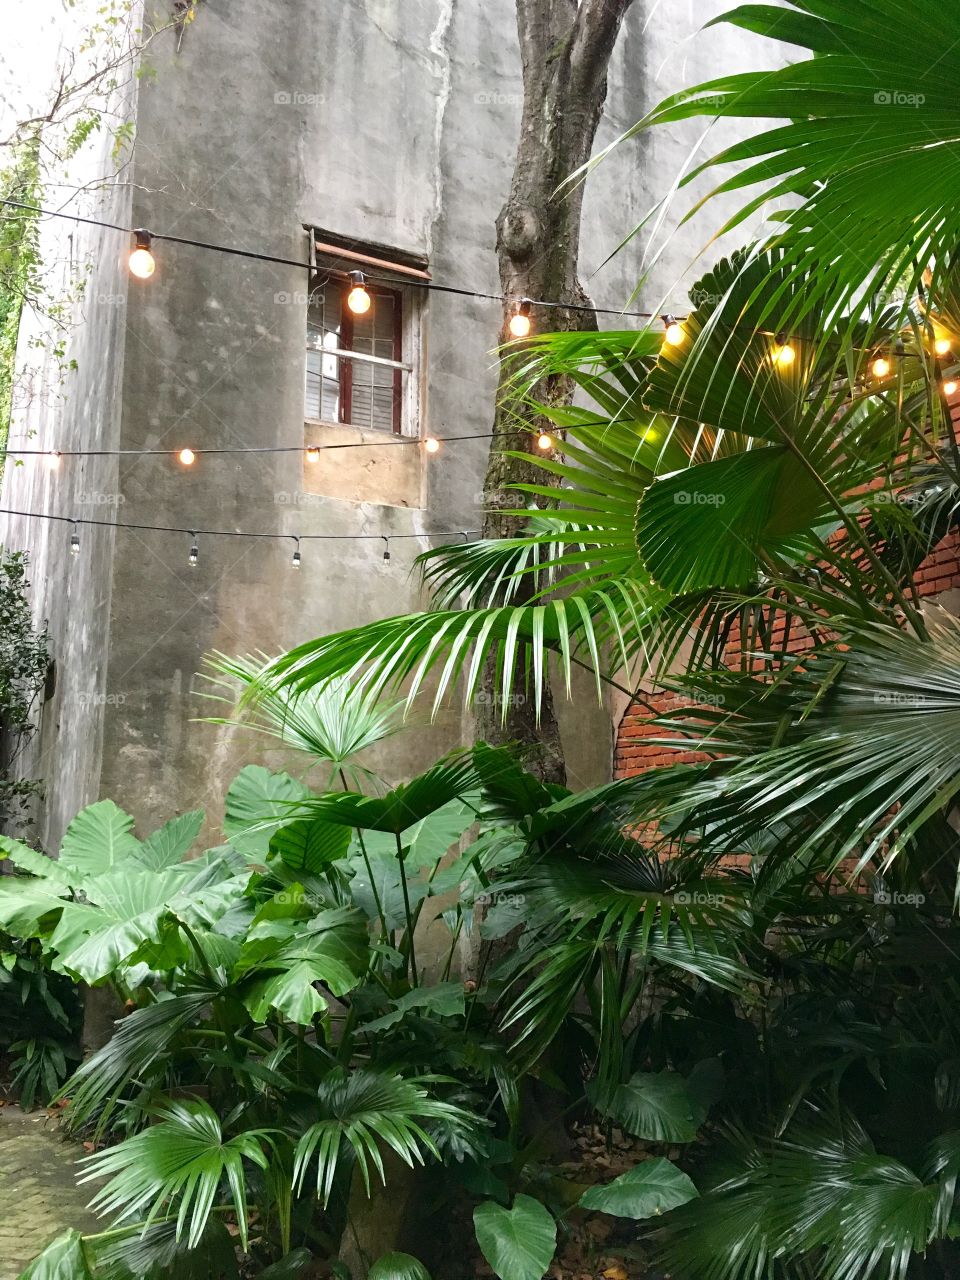 New Orleans Courtyard